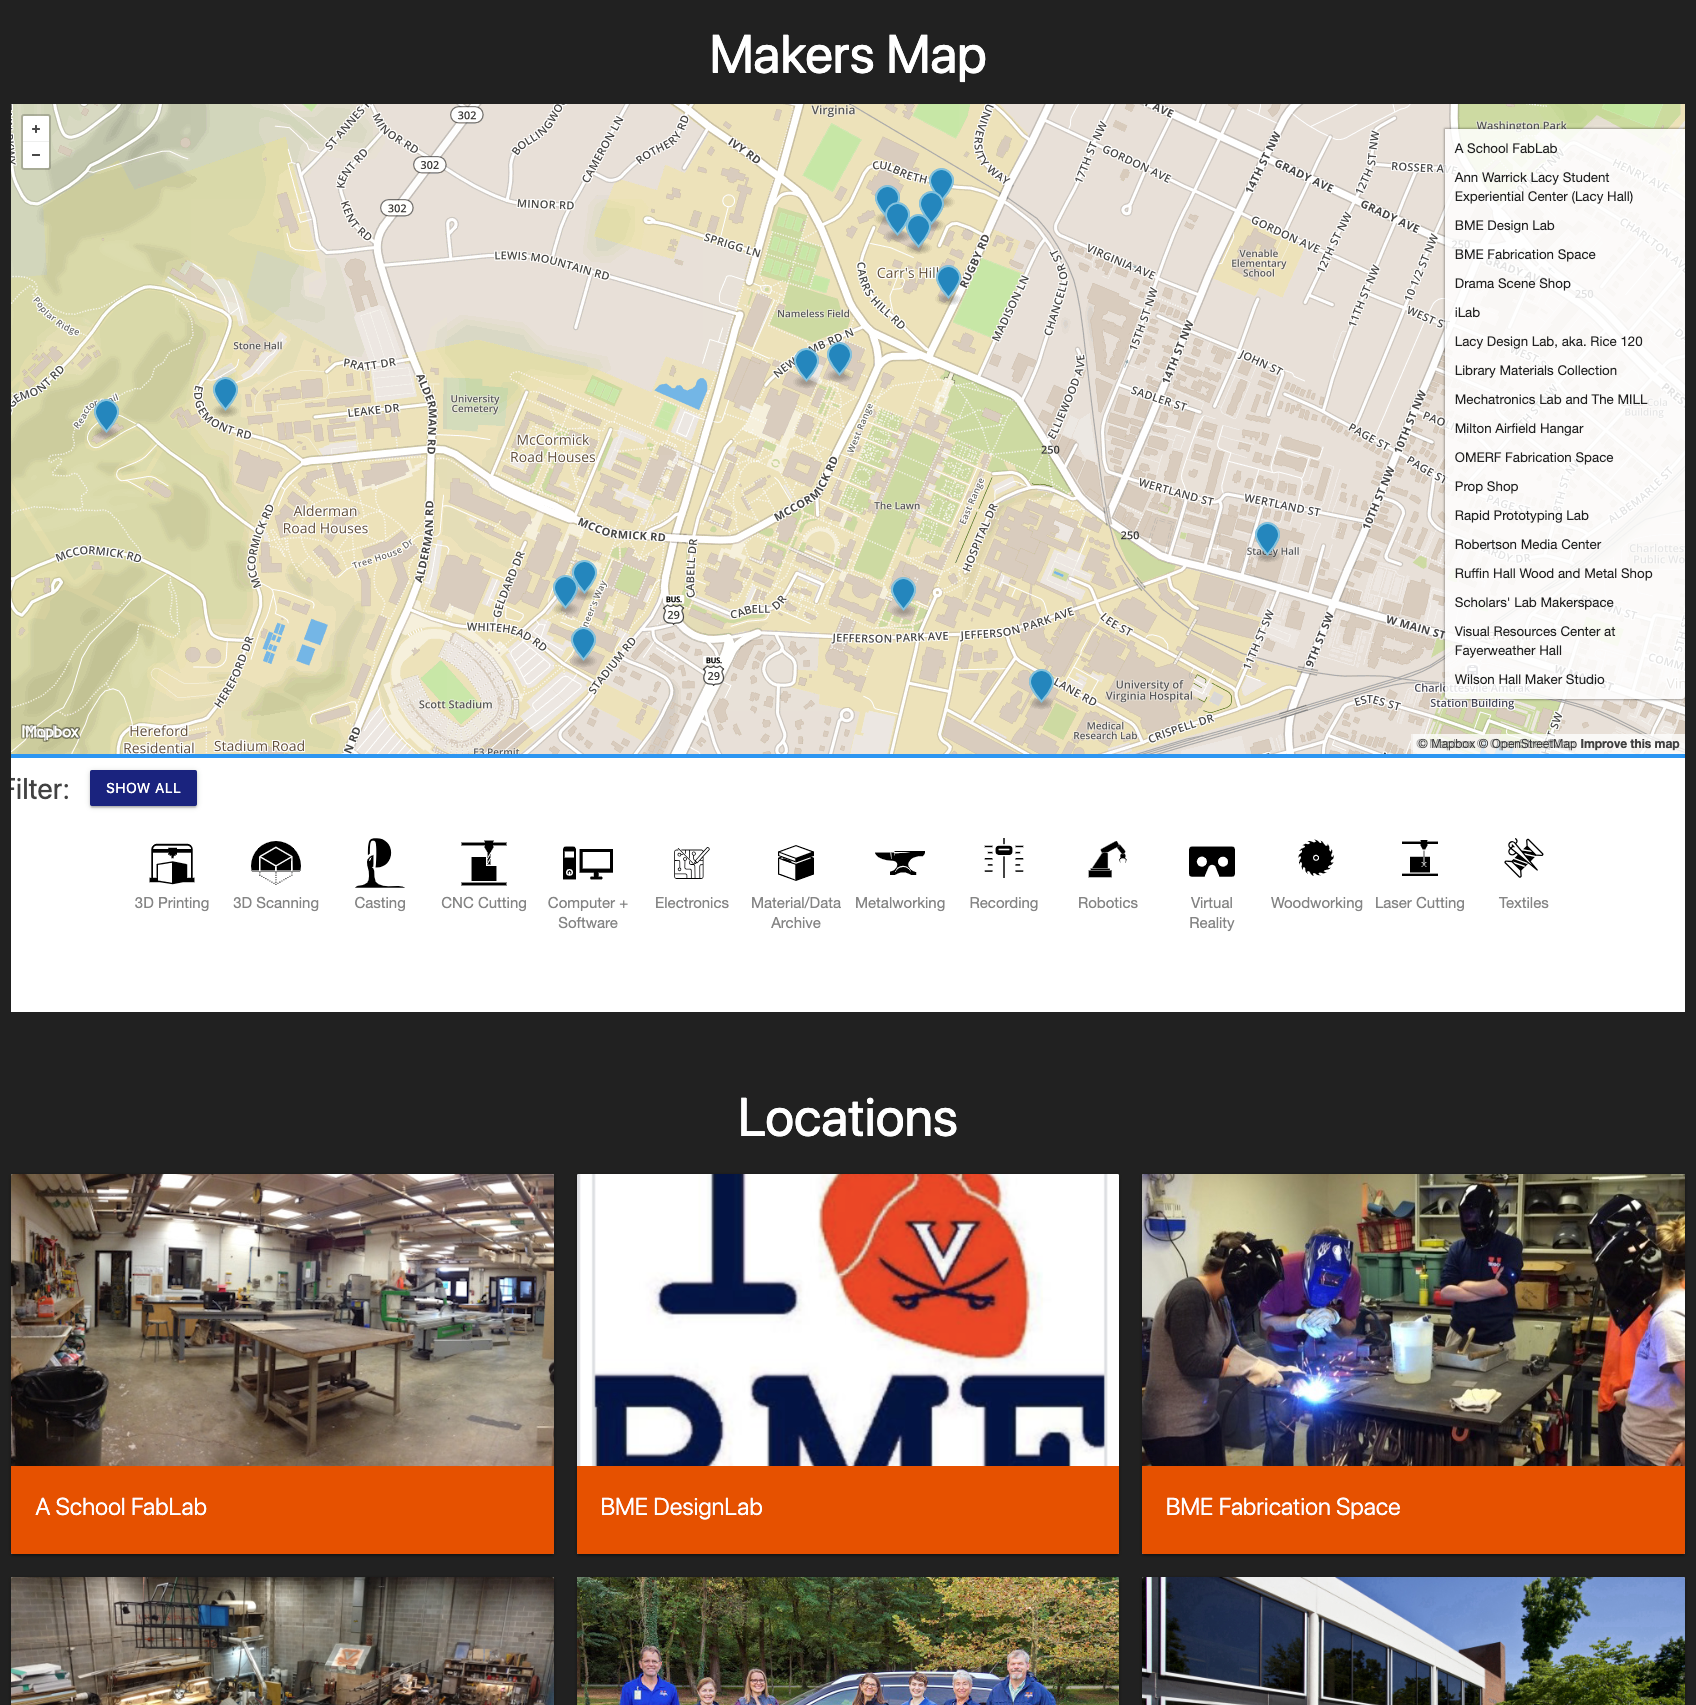 Images of spaces, shops, and labs at UVa.